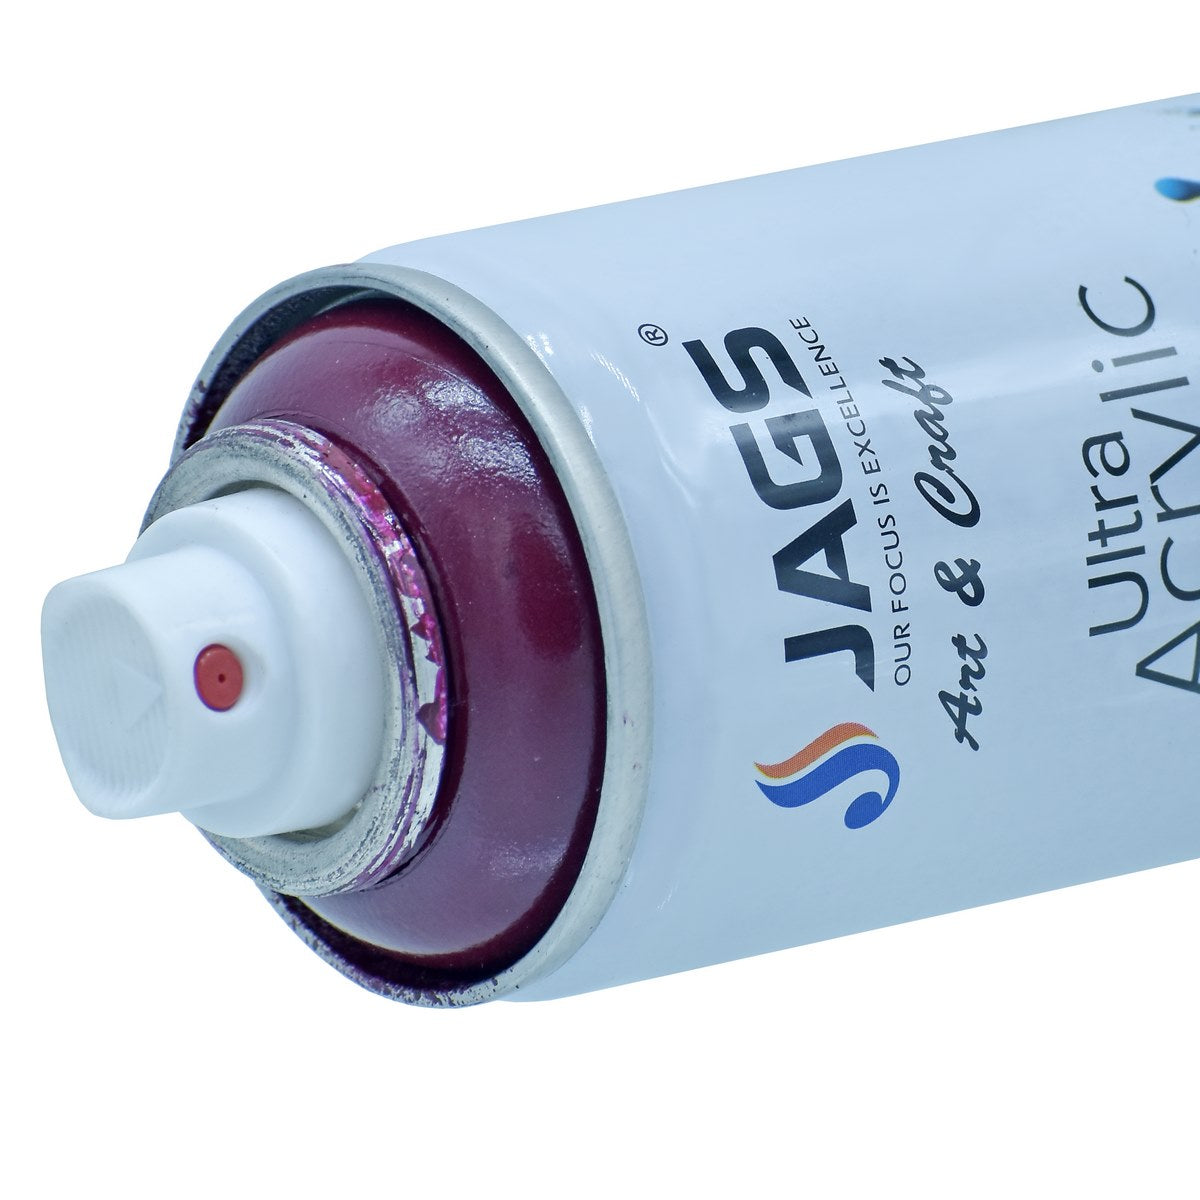 jags-mumbai Paint & Colours Jags Spray Ultra Acrylic 150ml Wine Red: Precision and Performance in Every Spray